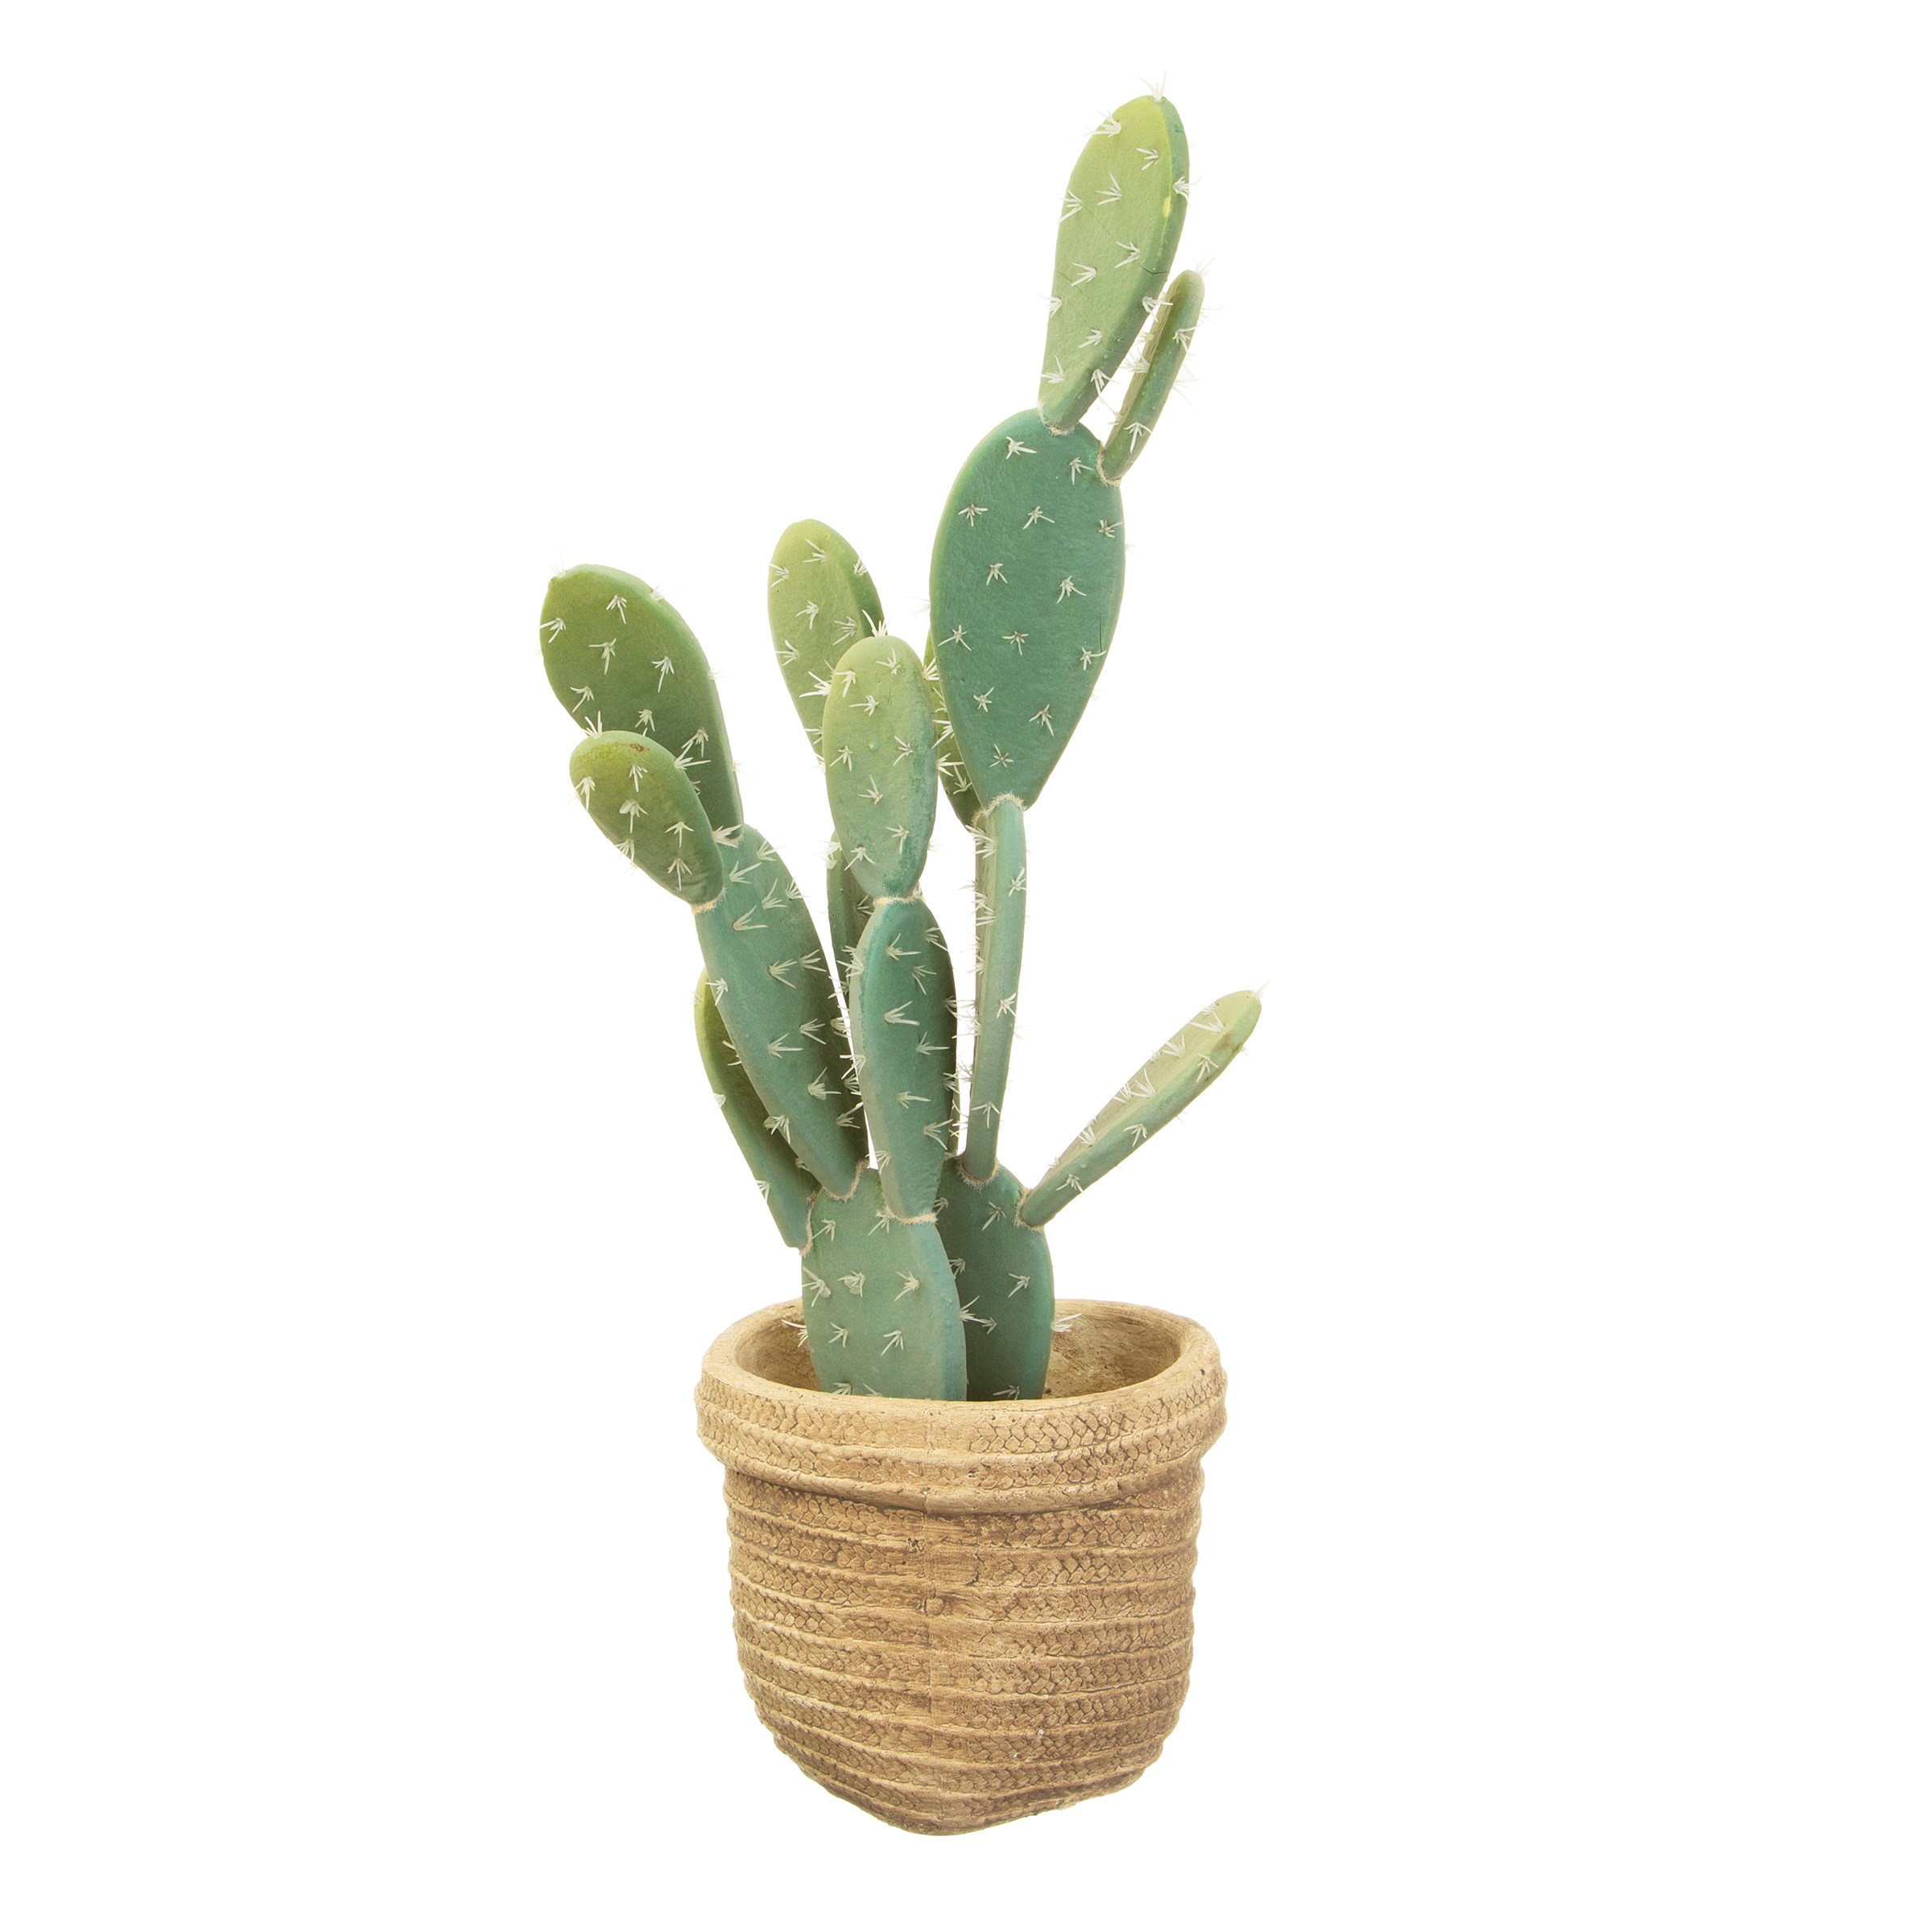 Woven Look Basket Style Planter White Background With Plant